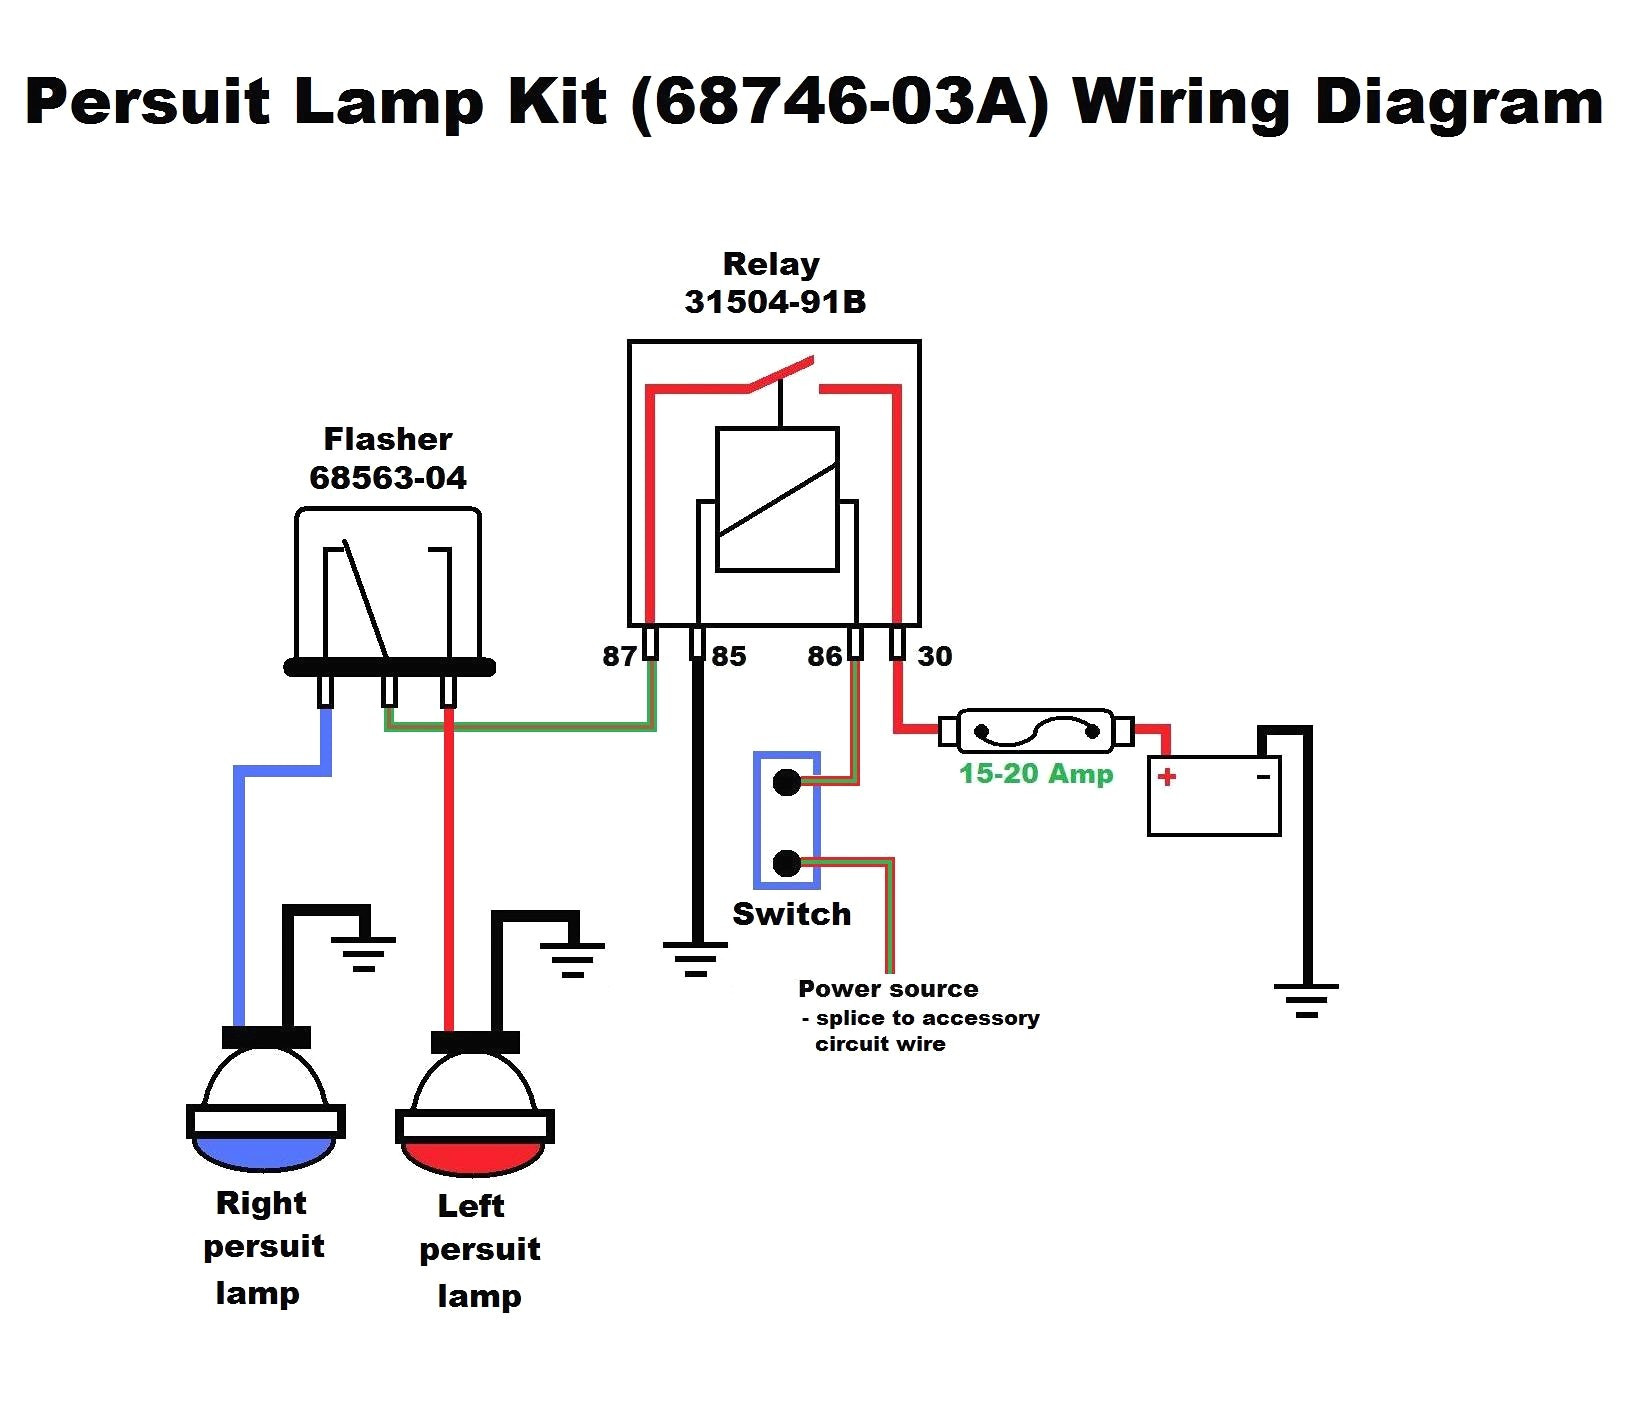 Flasher Relay Pin Outsd Diagram] 12 Volt Flasher Relay Wiring Diagram Full Version Hd … Of Flasher Relay Pin Outsd